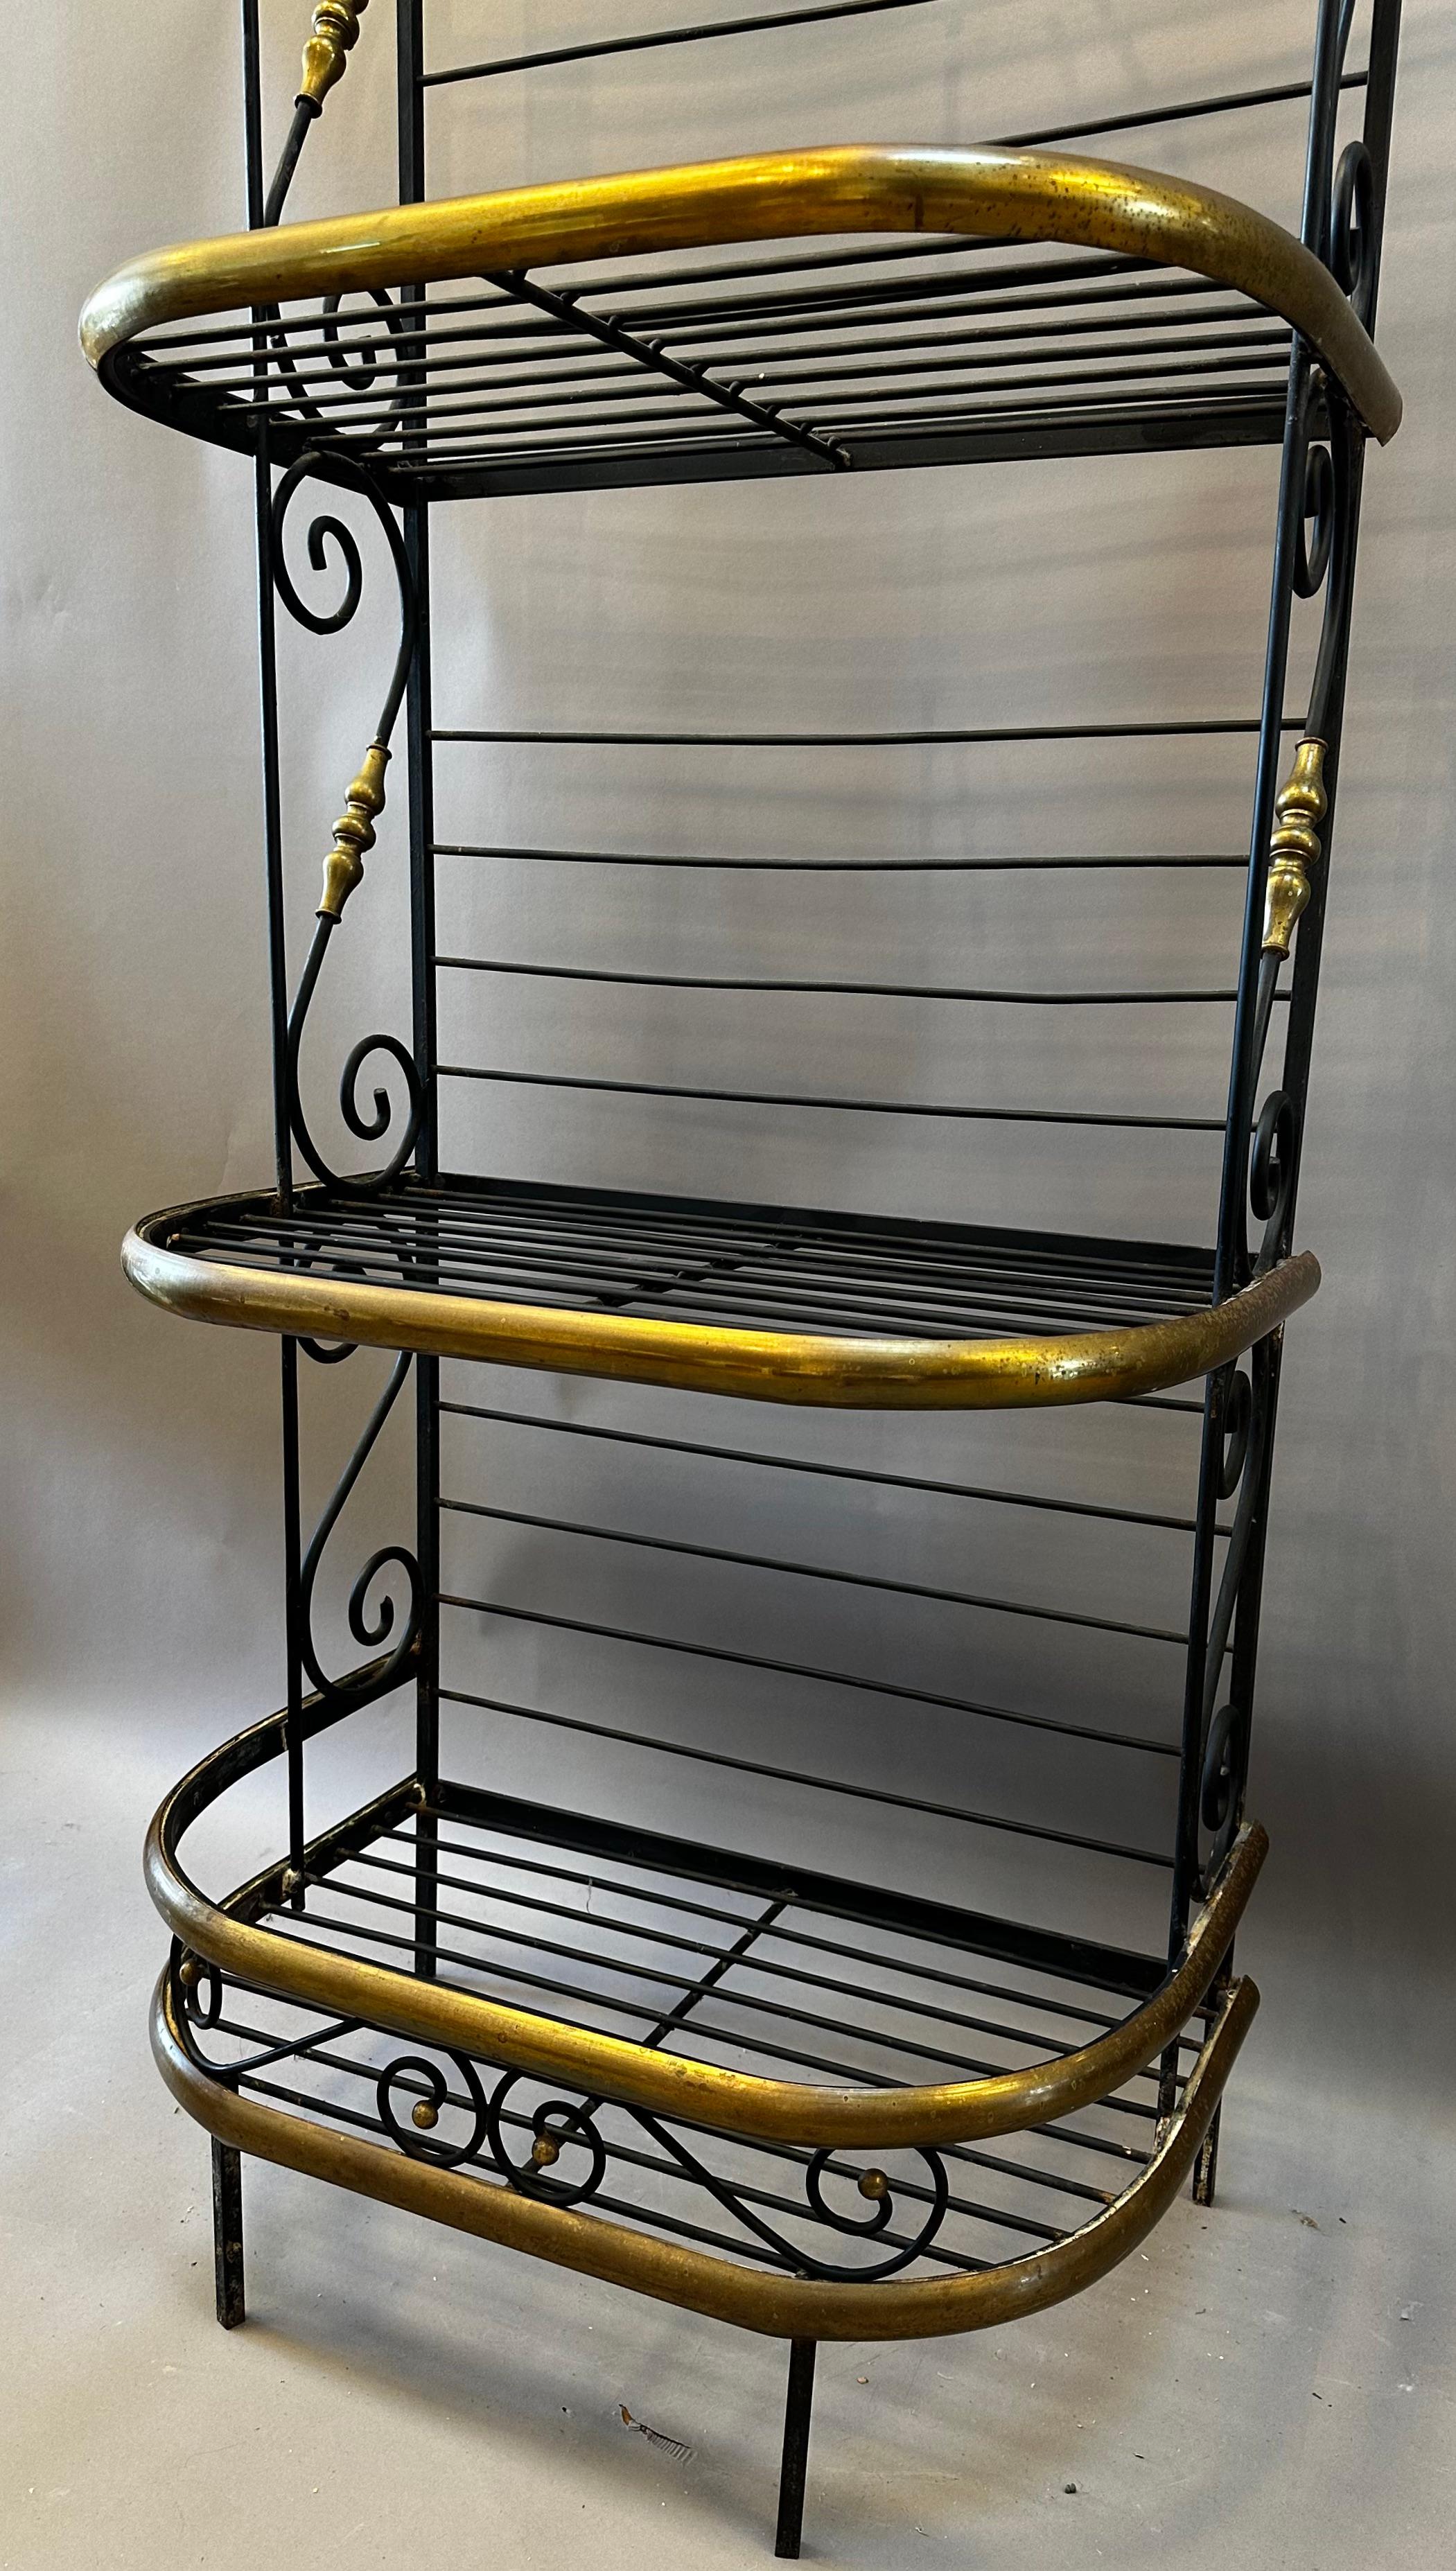 French Provincial Steel and Brass Bakers Rack In Good Condition For Sale In Middleburg, VA